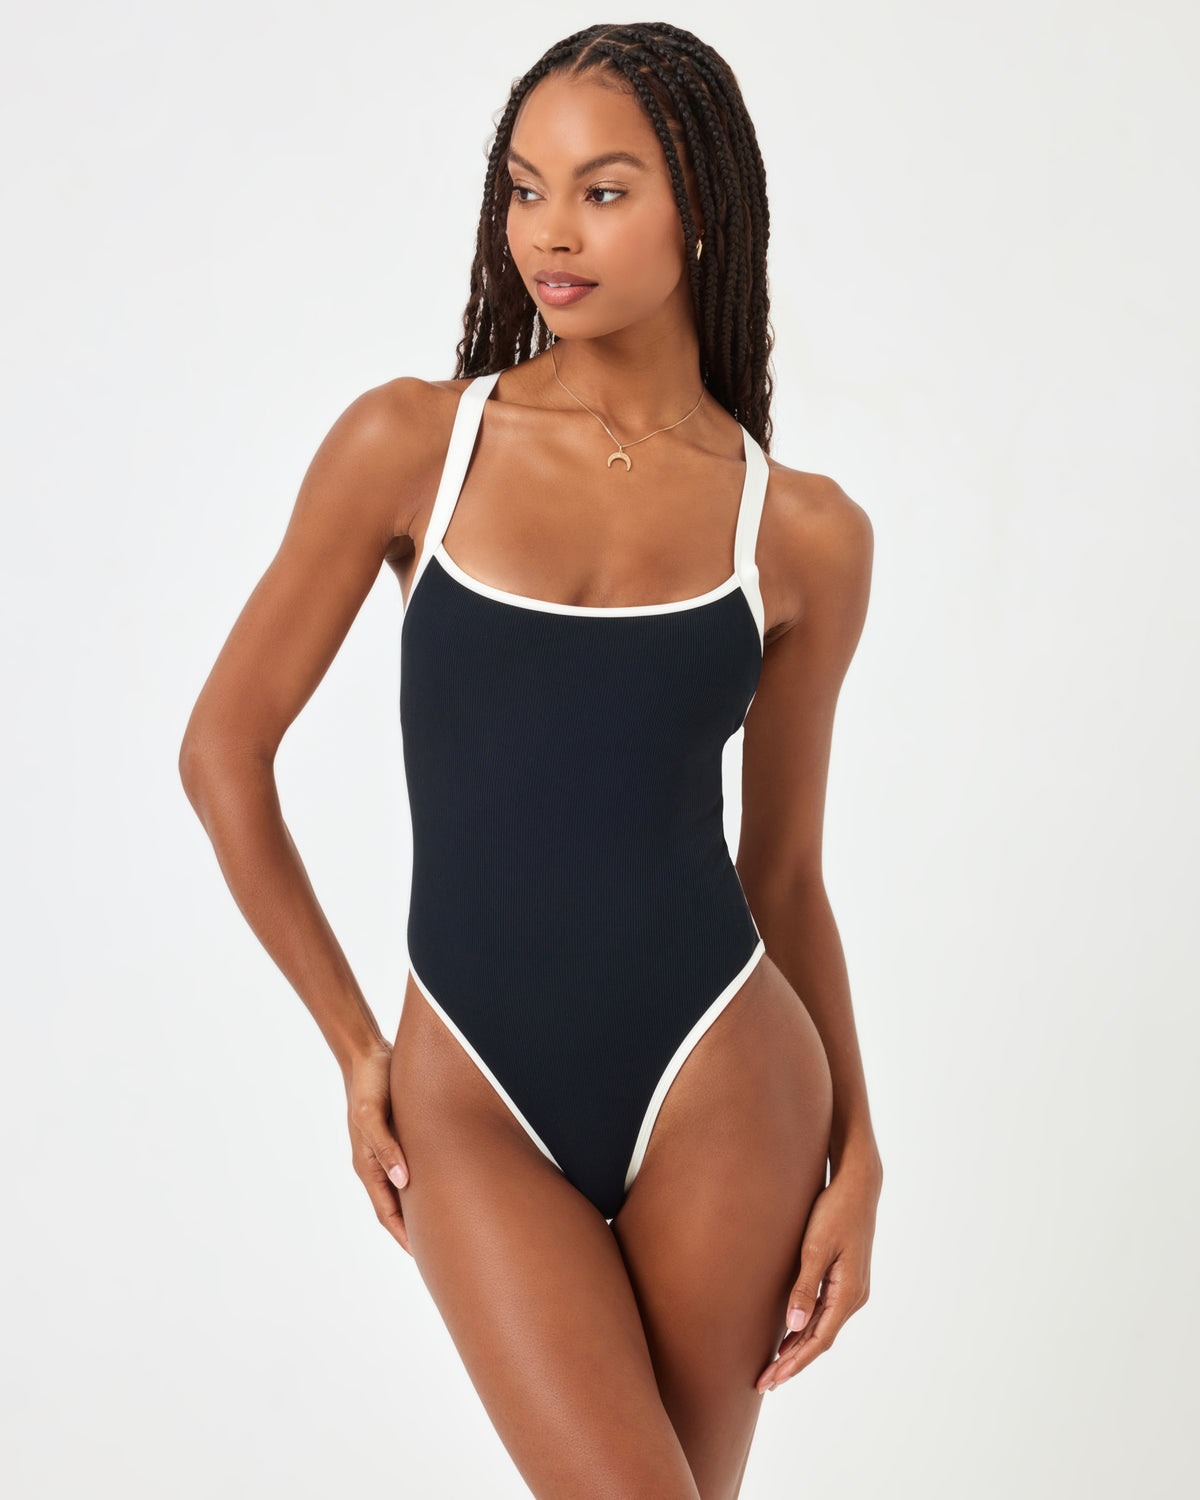 Ribbed Baewatch One Piece Swimsuit - Black-Cream Black-Cream | Model: Taelor (size: S) | Hover